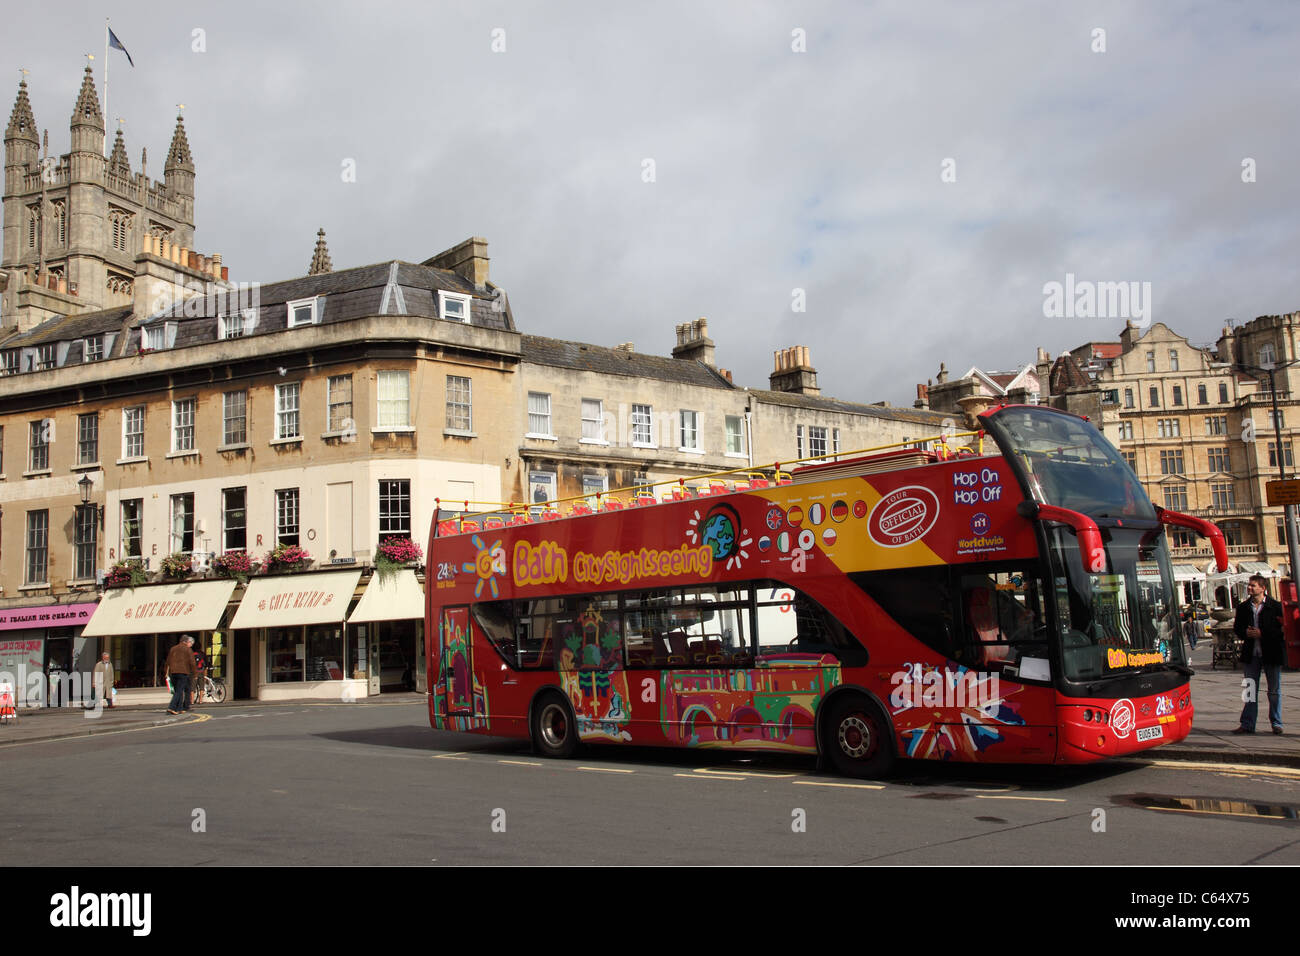 Red tourist sightseeing bus in Bath, England Stock Photo